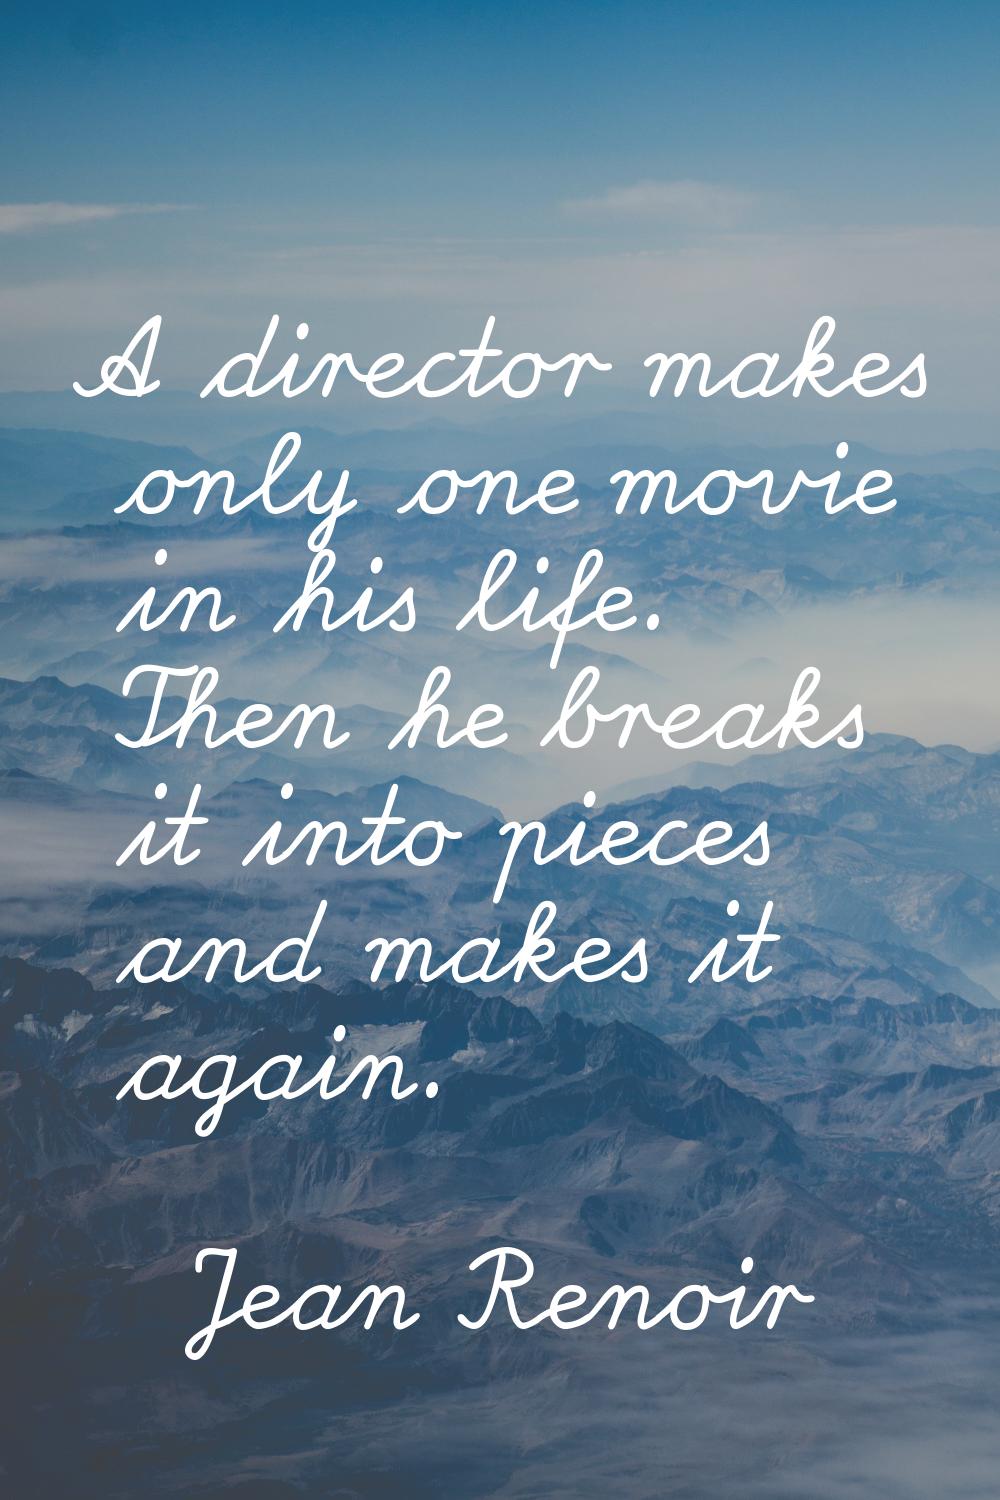 A director makes only one movie in his life. Then he breaks it into pieces and makes it again.